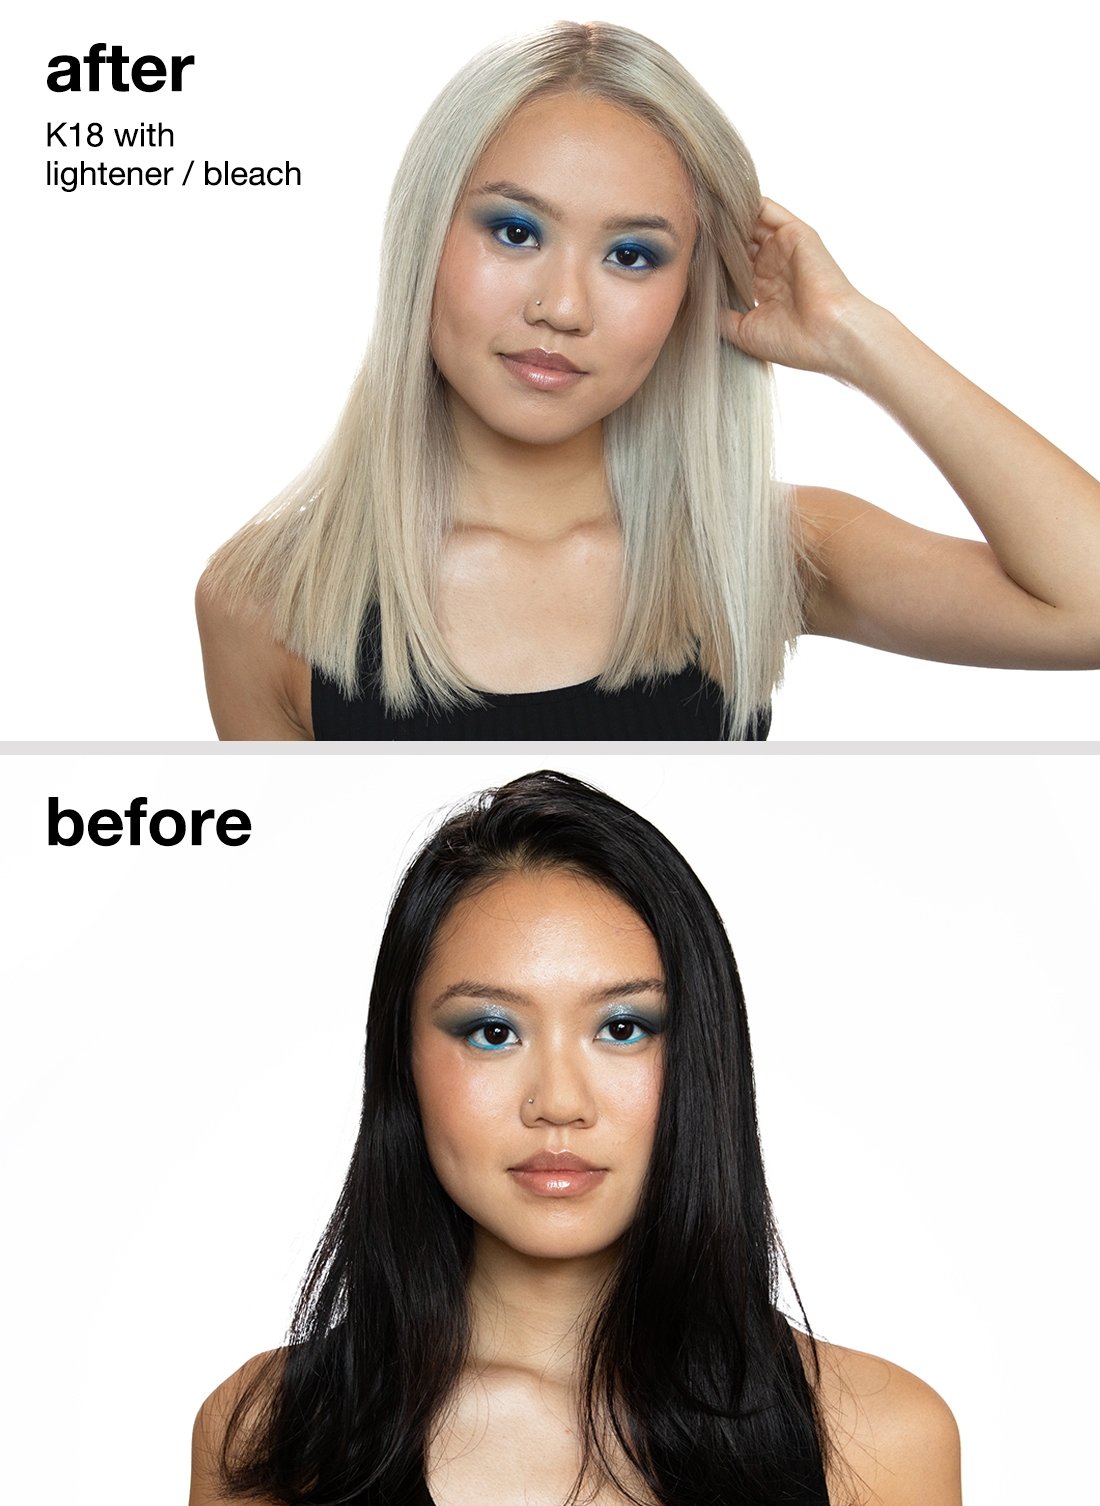 K18 Pro Hair Repair Mini Kit before and after